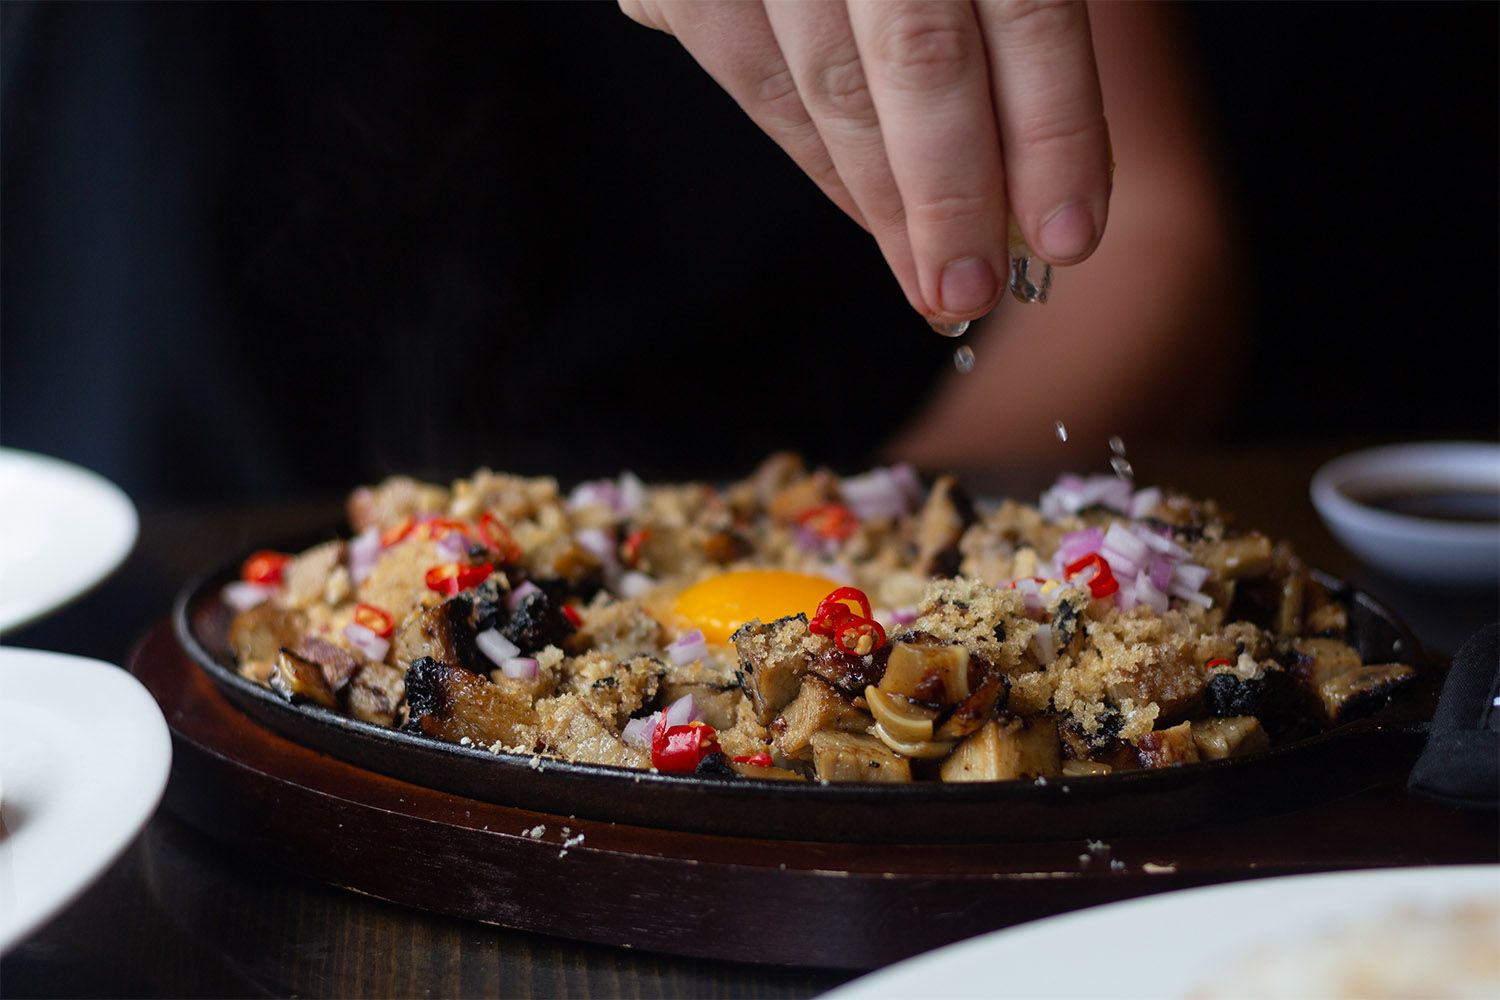 How to Cook Sisig the Healthier Way